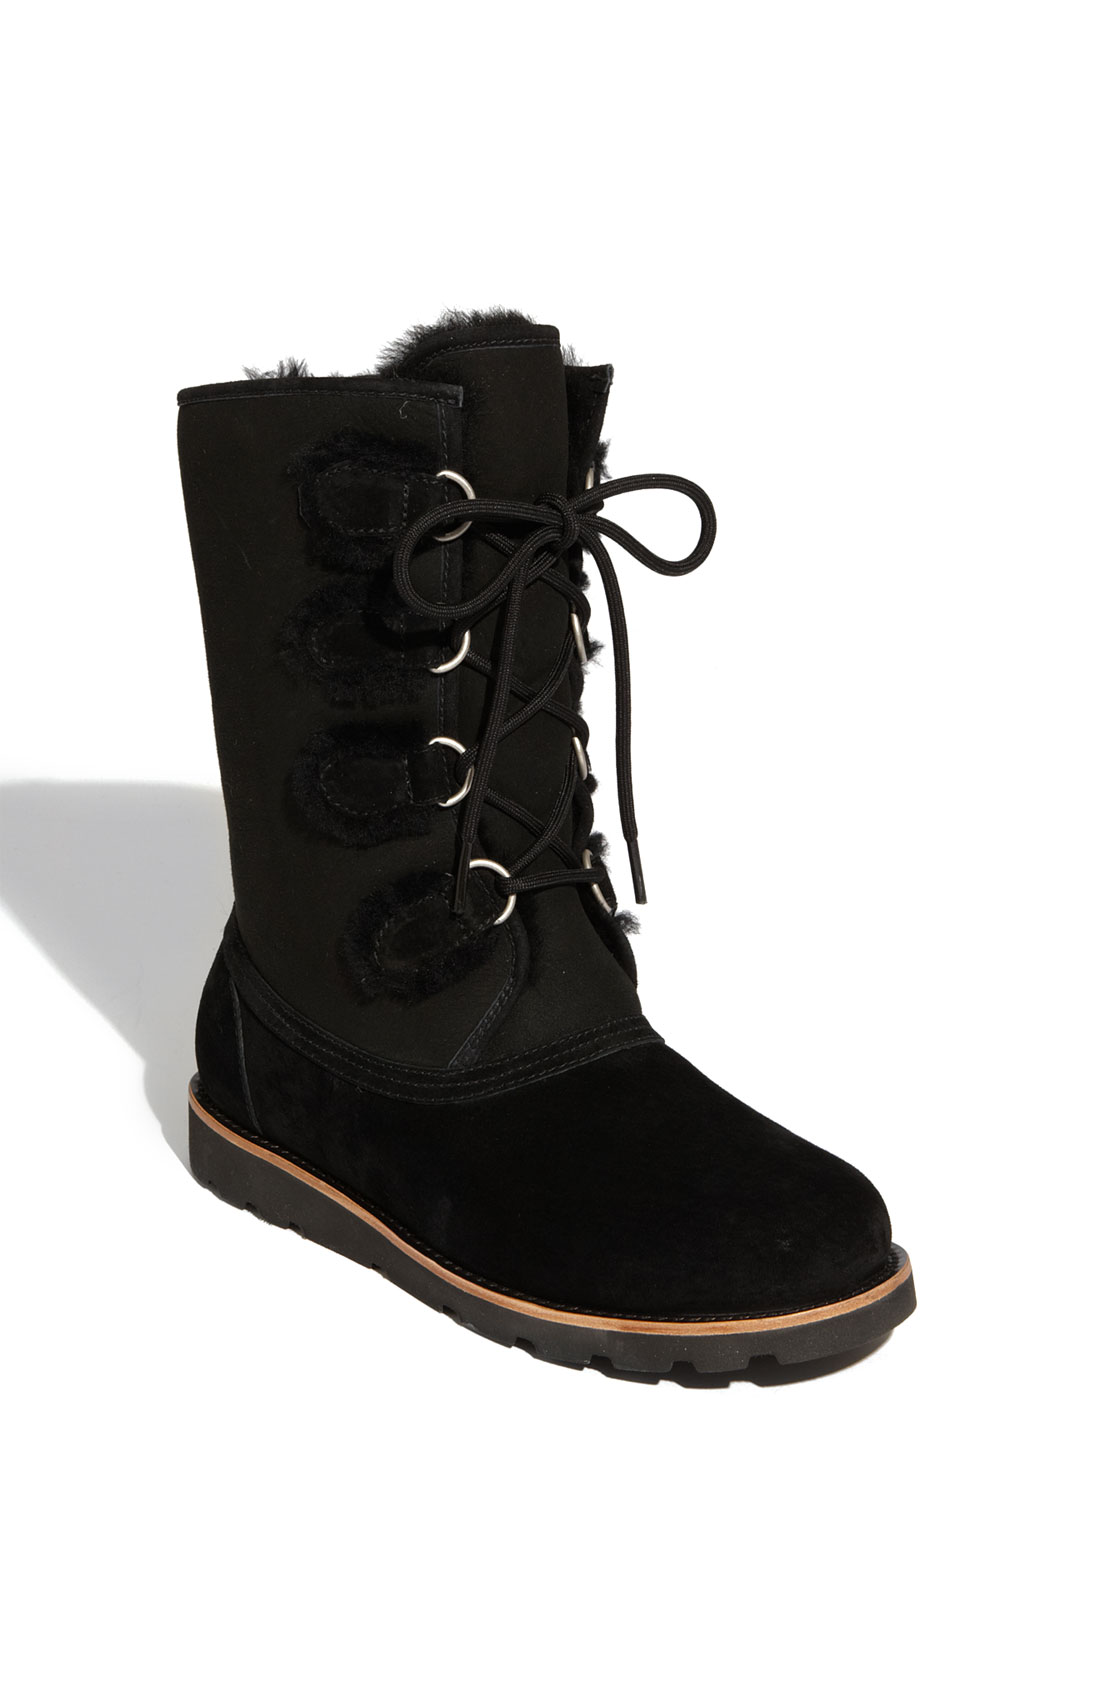 Ugg Black Suede and Shearling Lace-Up Boot in Black | Lyst